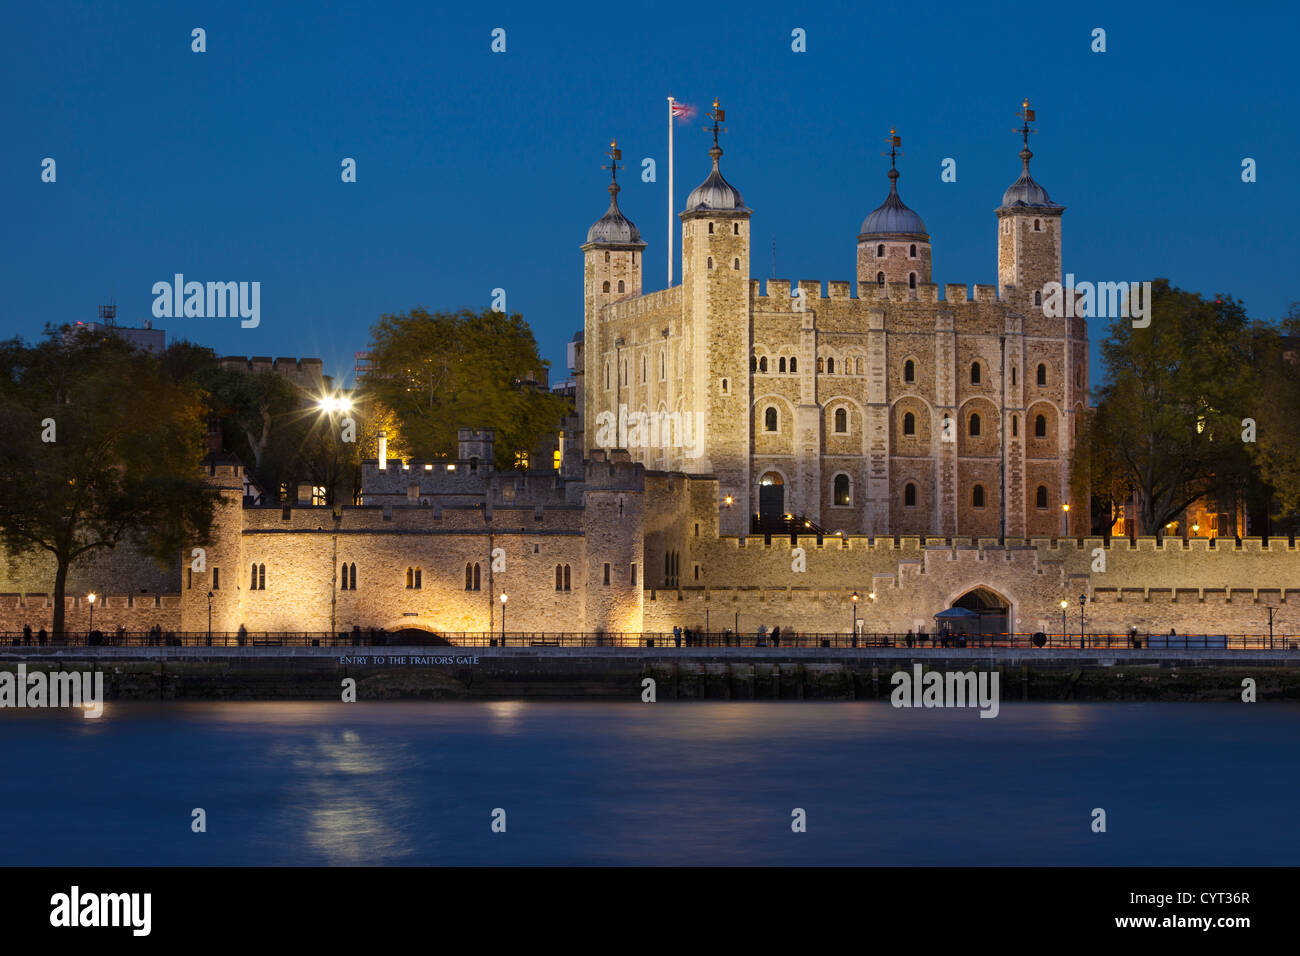 Tower of London viewed from across the River Thames, London England, UK Stock Photo